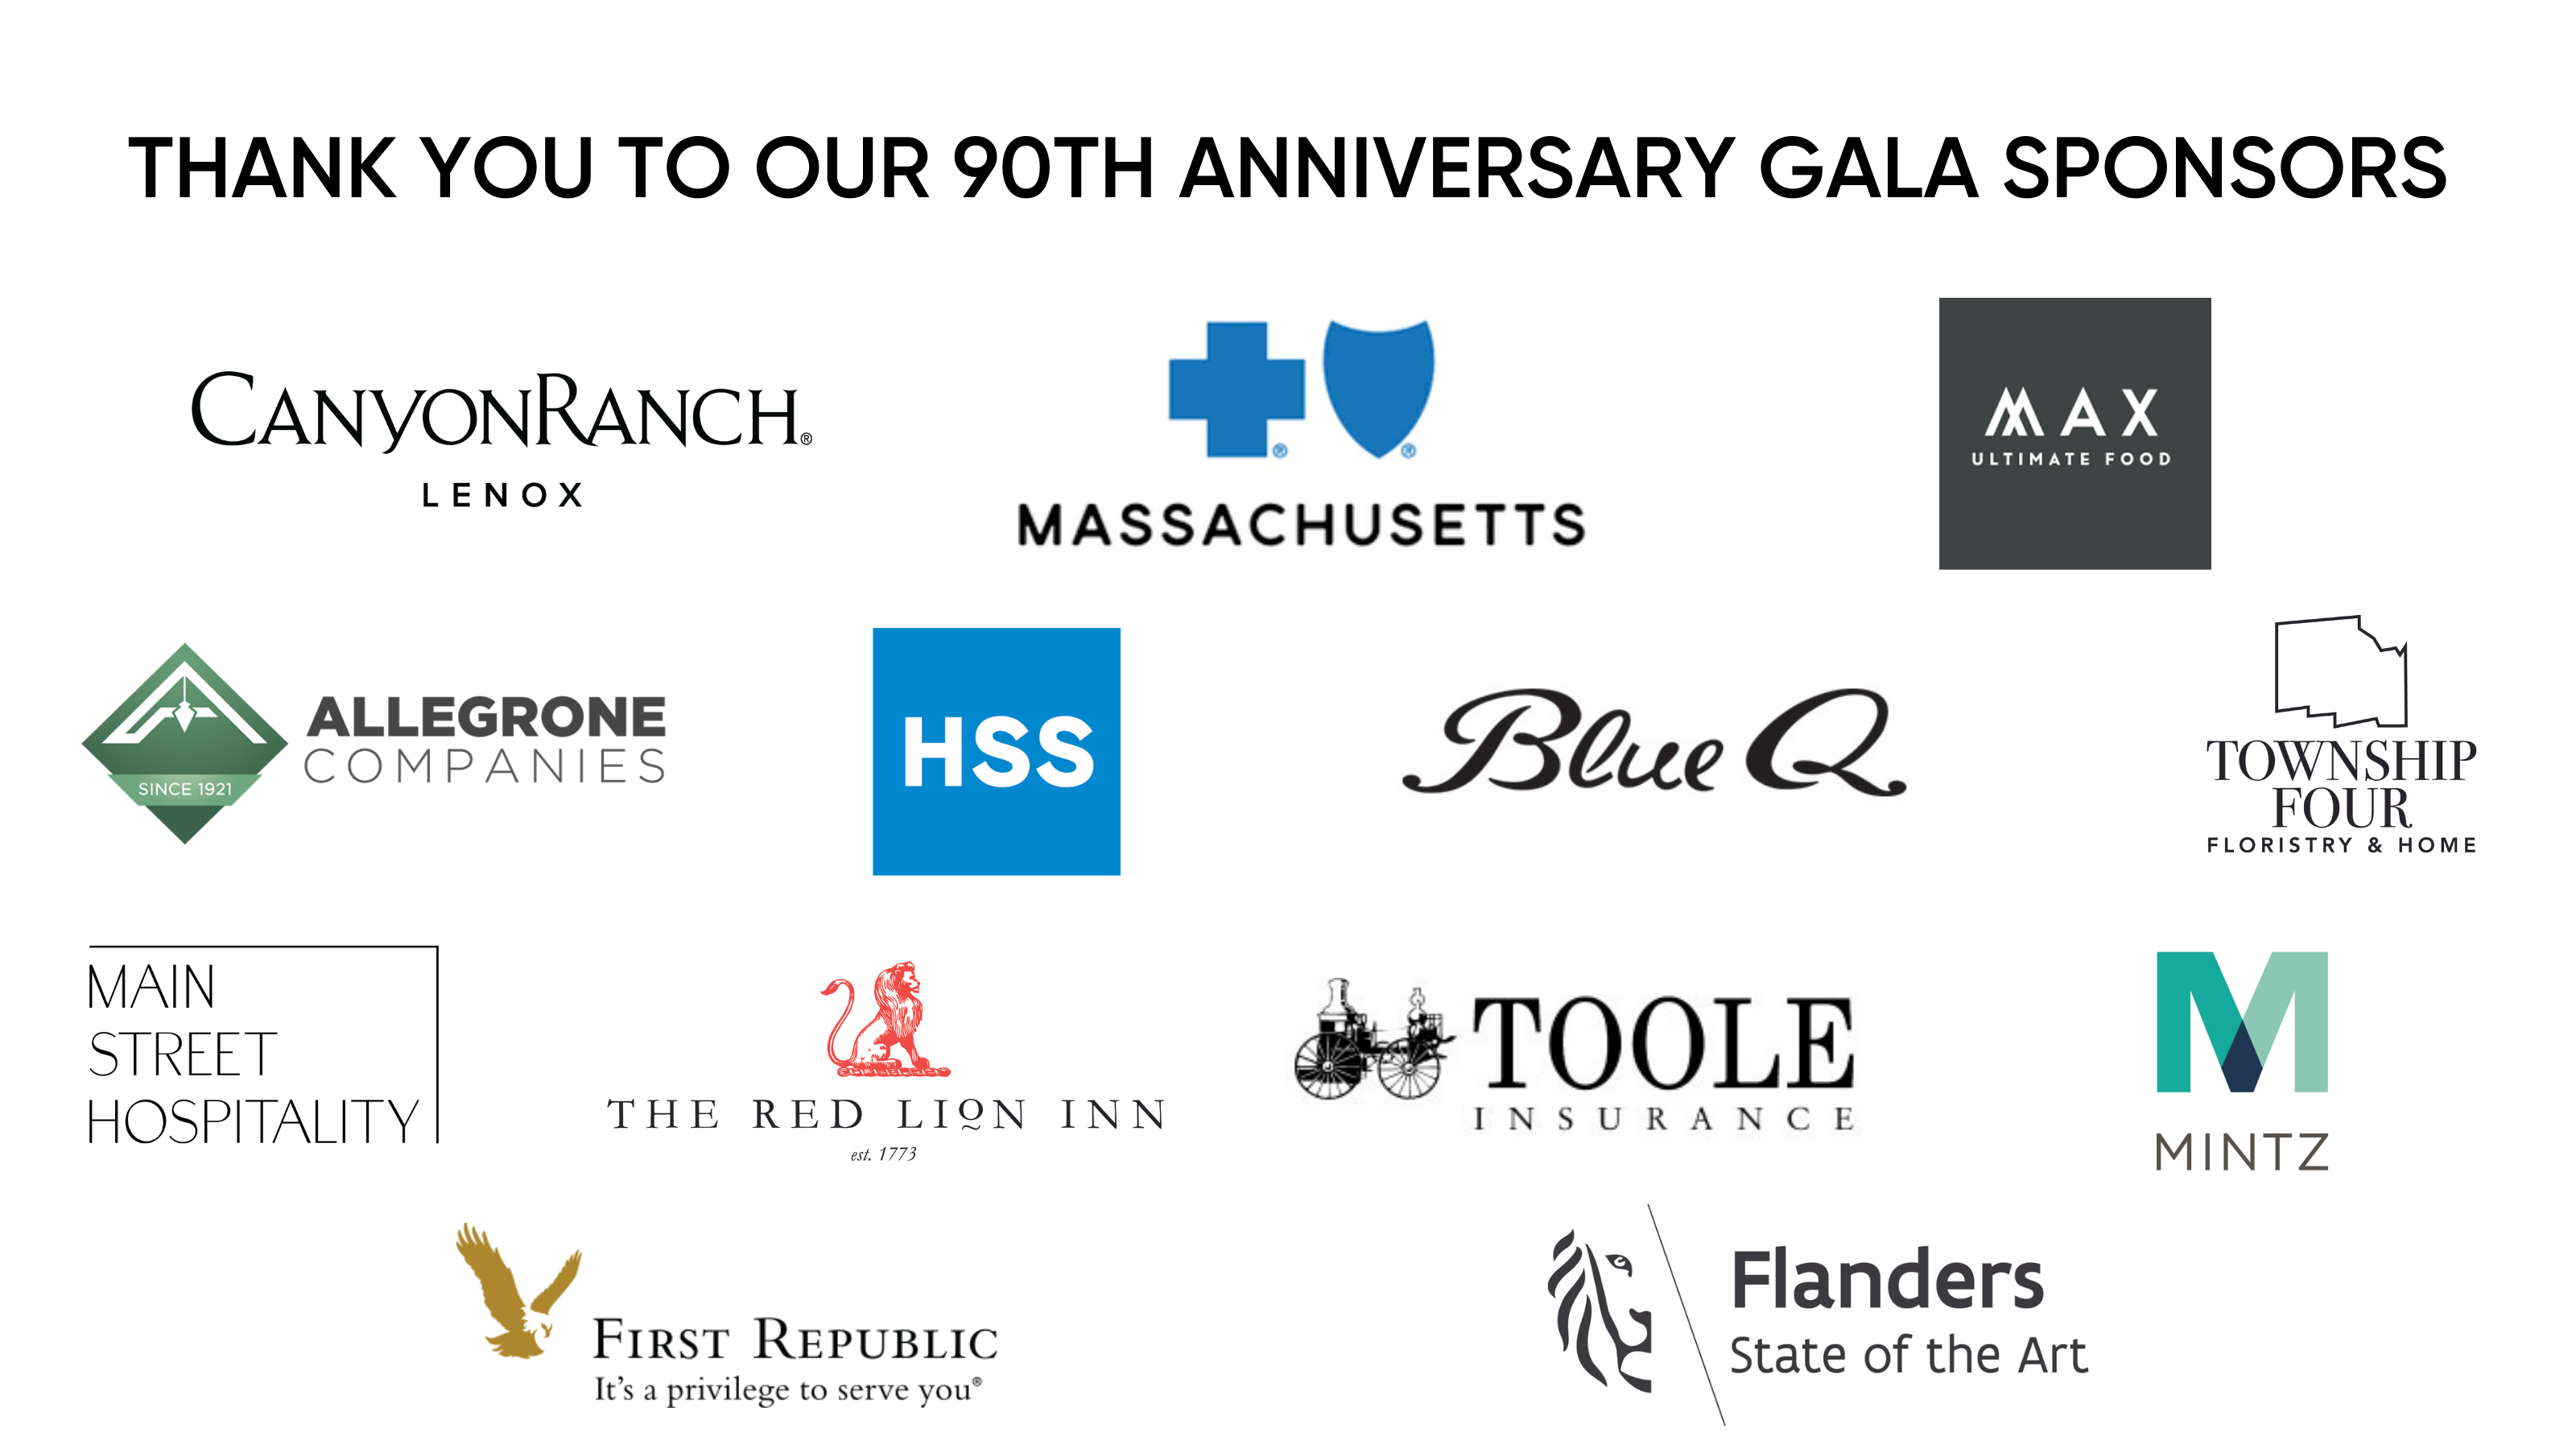 Grid of Gala sponsors with logos of Canyon Ranch, Blue Cross Blue Shield Massachusetts, Max Ultimate Food, Allegrone Companies, HSS, Blue Q, Township Four, Main Street Hospitality, The Red Lion Inn, Toole Insurance, Mintz, First Republic, and Flanders